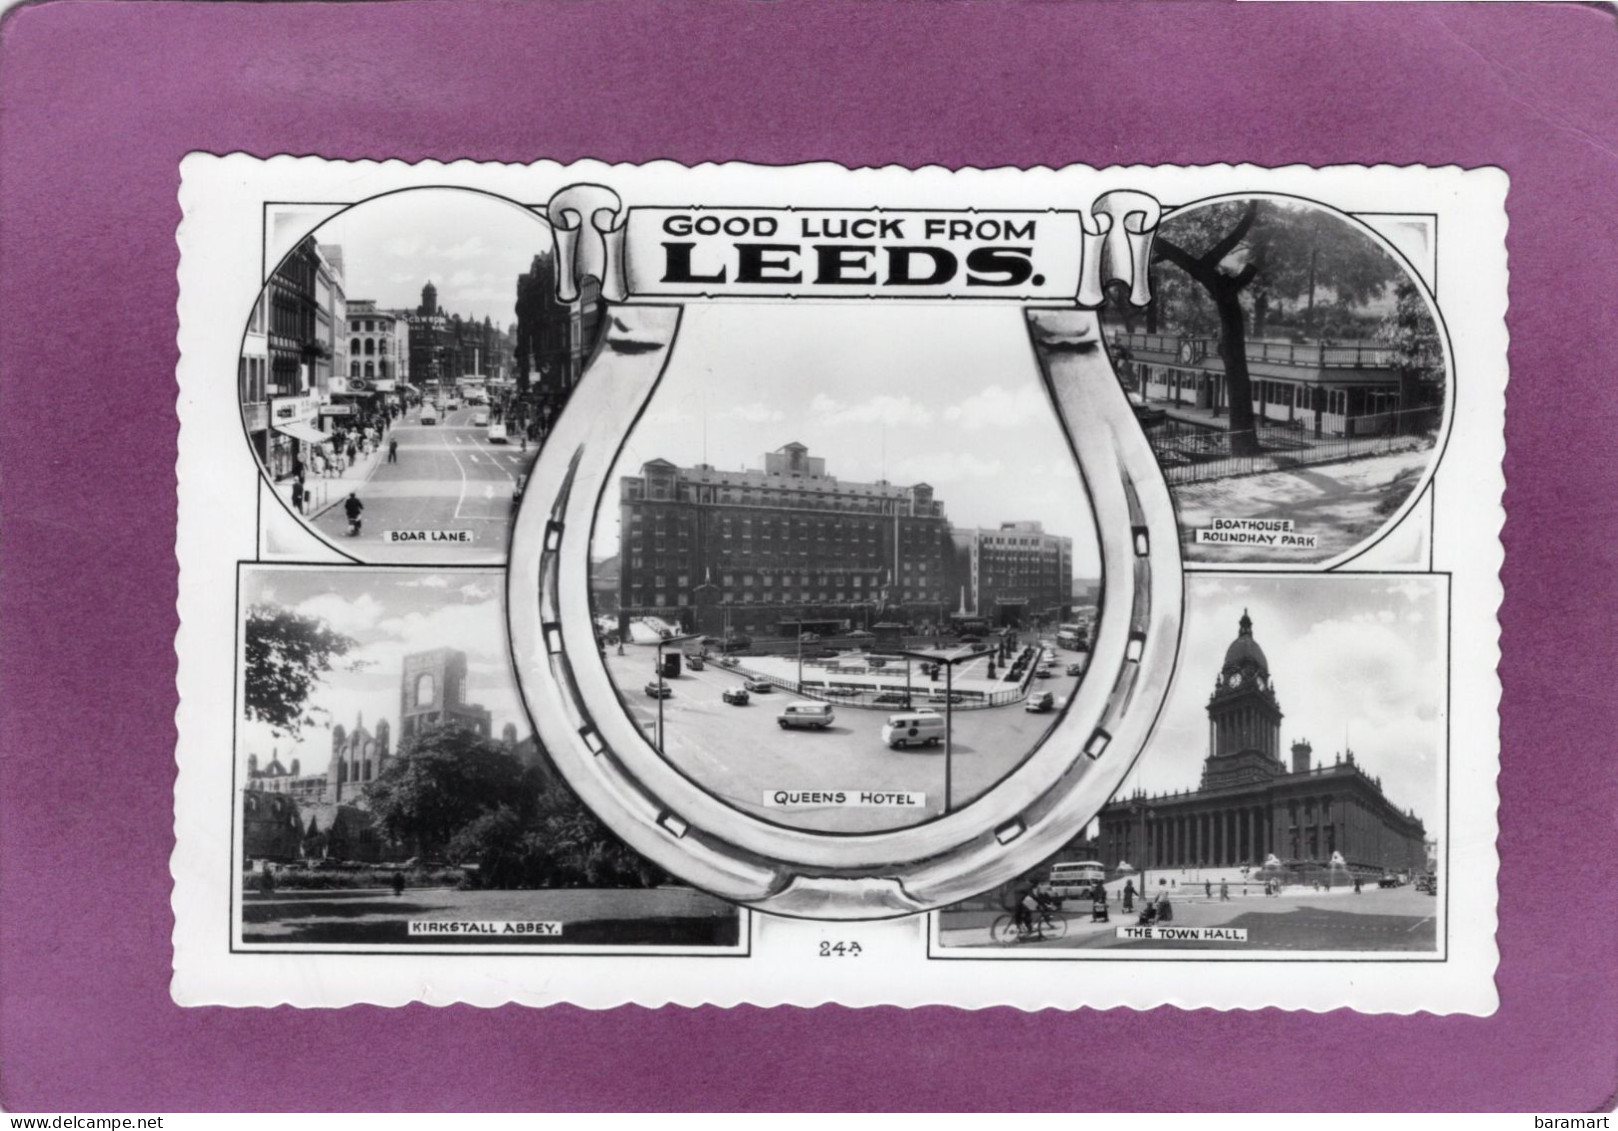 Good Luck From LEEDS Multiview Boar Lane Queens Hotel Boathouse Roundhay Park Kirkstall Abbey The Town Hall - Leeds